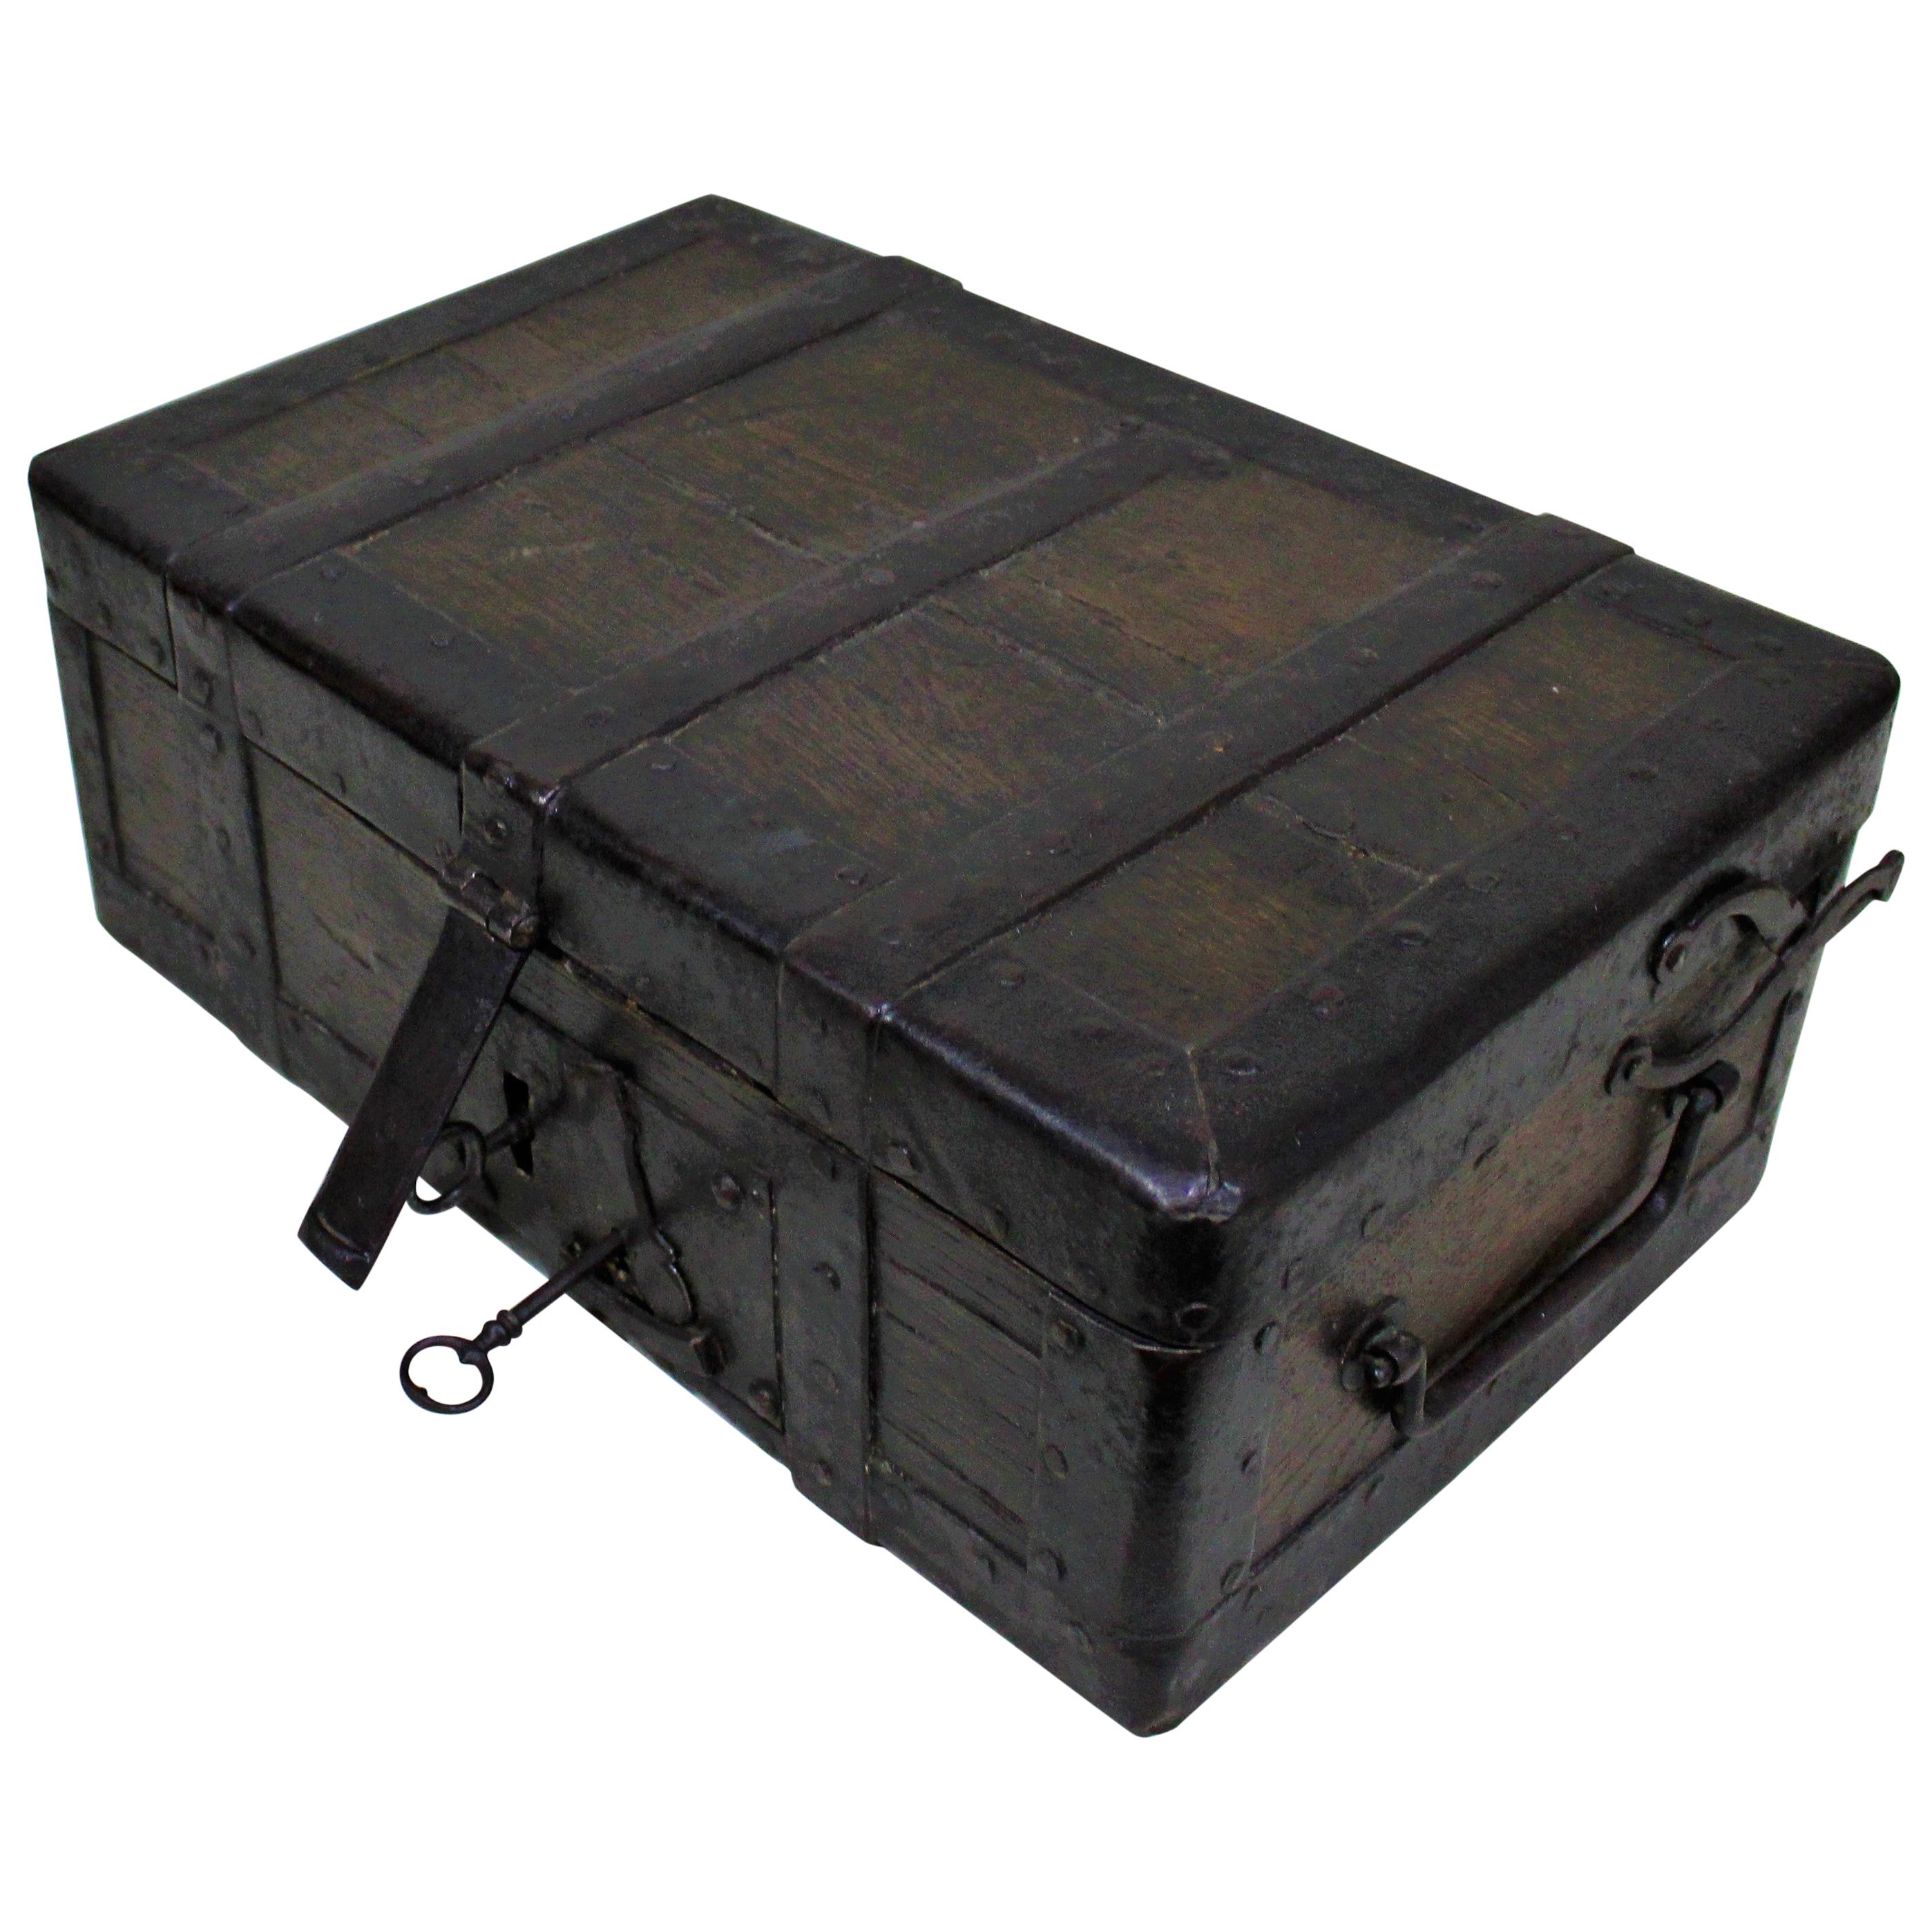 18th Century Wrought Iron and Wood Strong Box